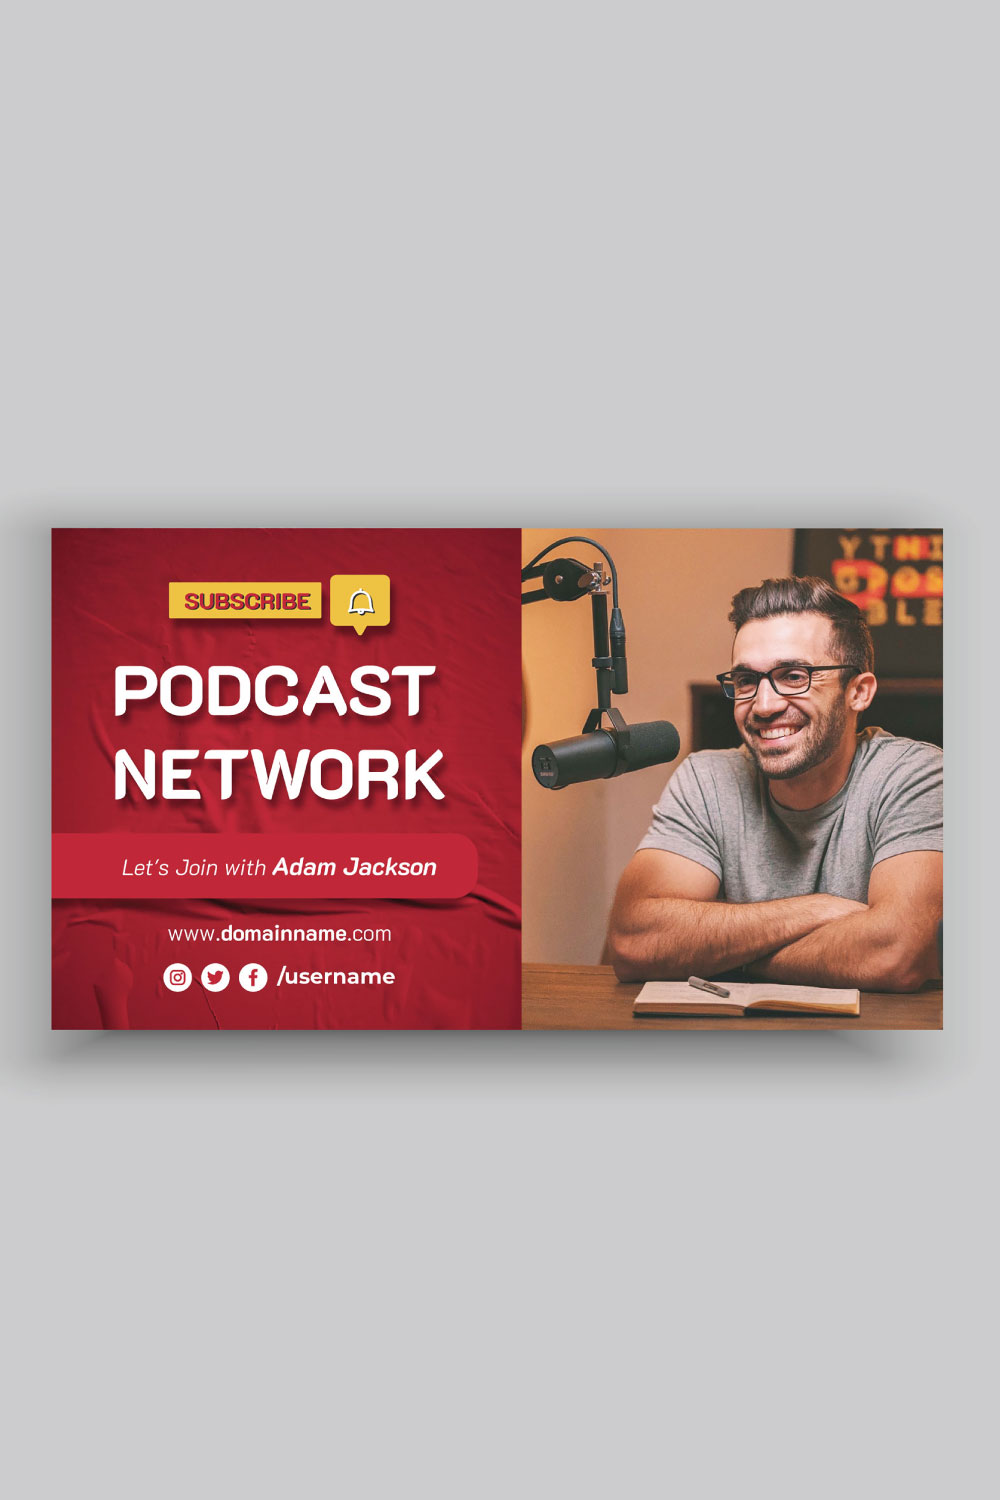 YouTube Thumbnail Design for podcast pinterest preview image.